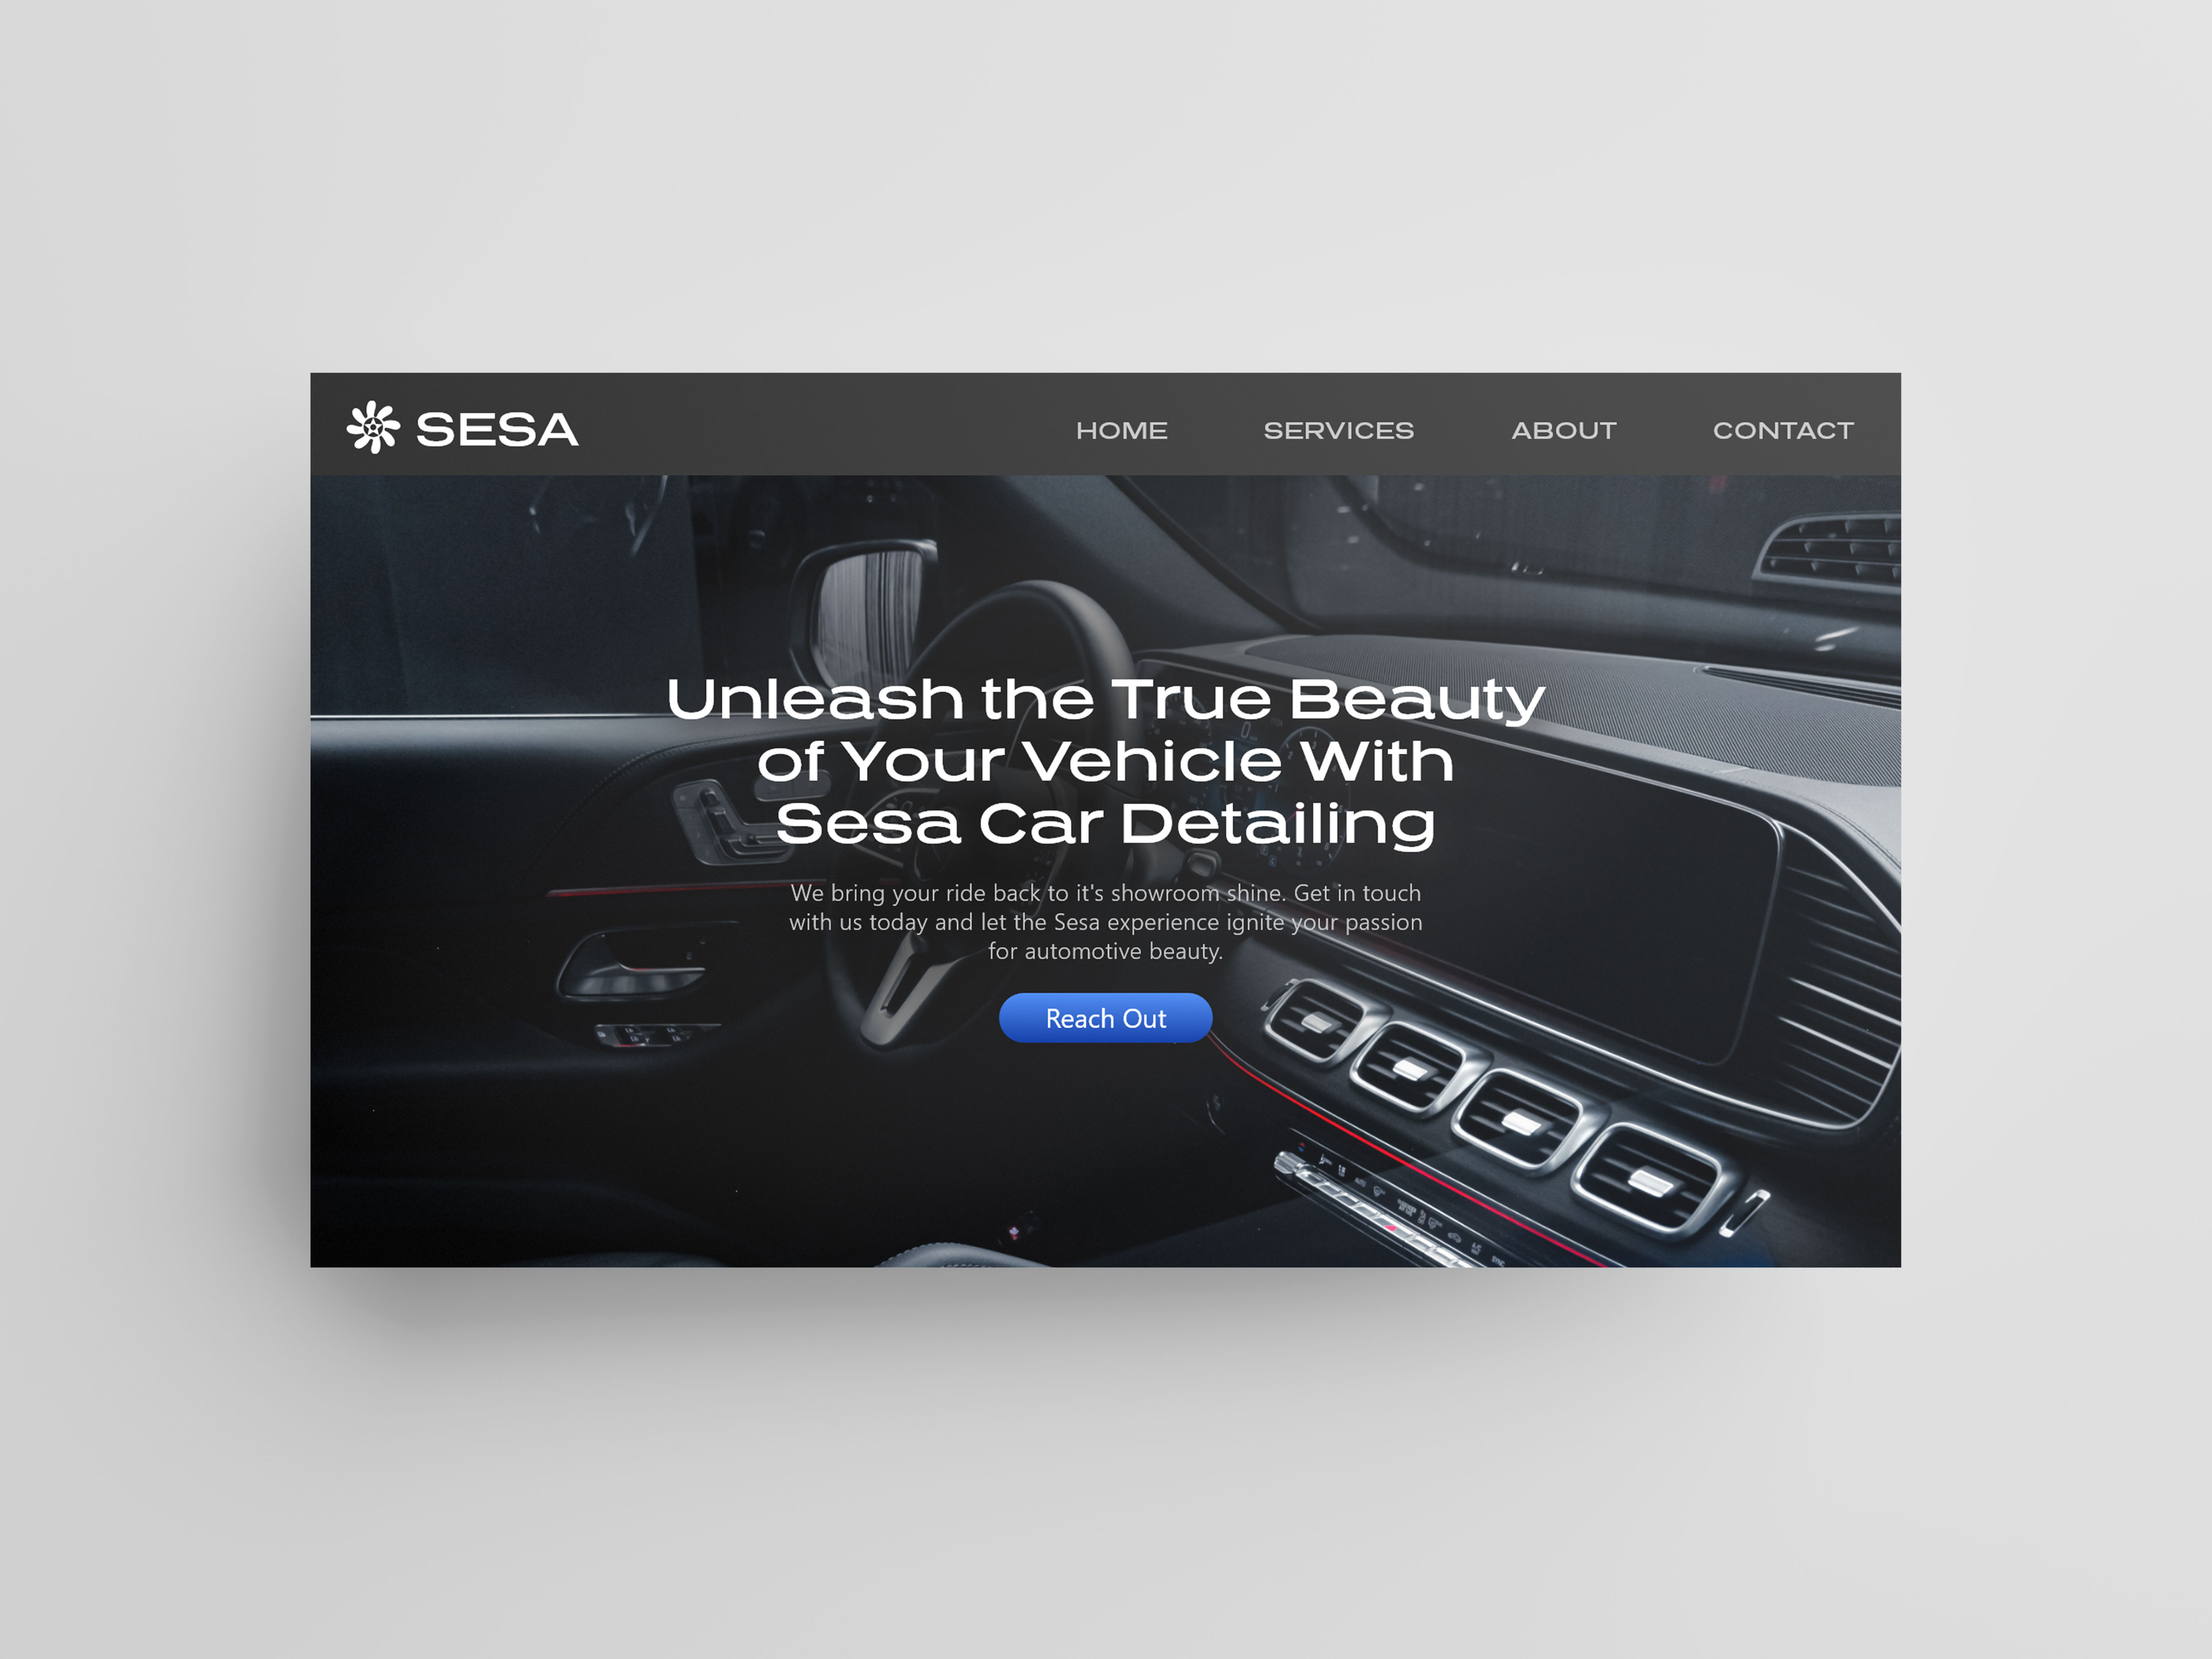 Mockup of hero section of the website design for the car detailing company, Sesa Services